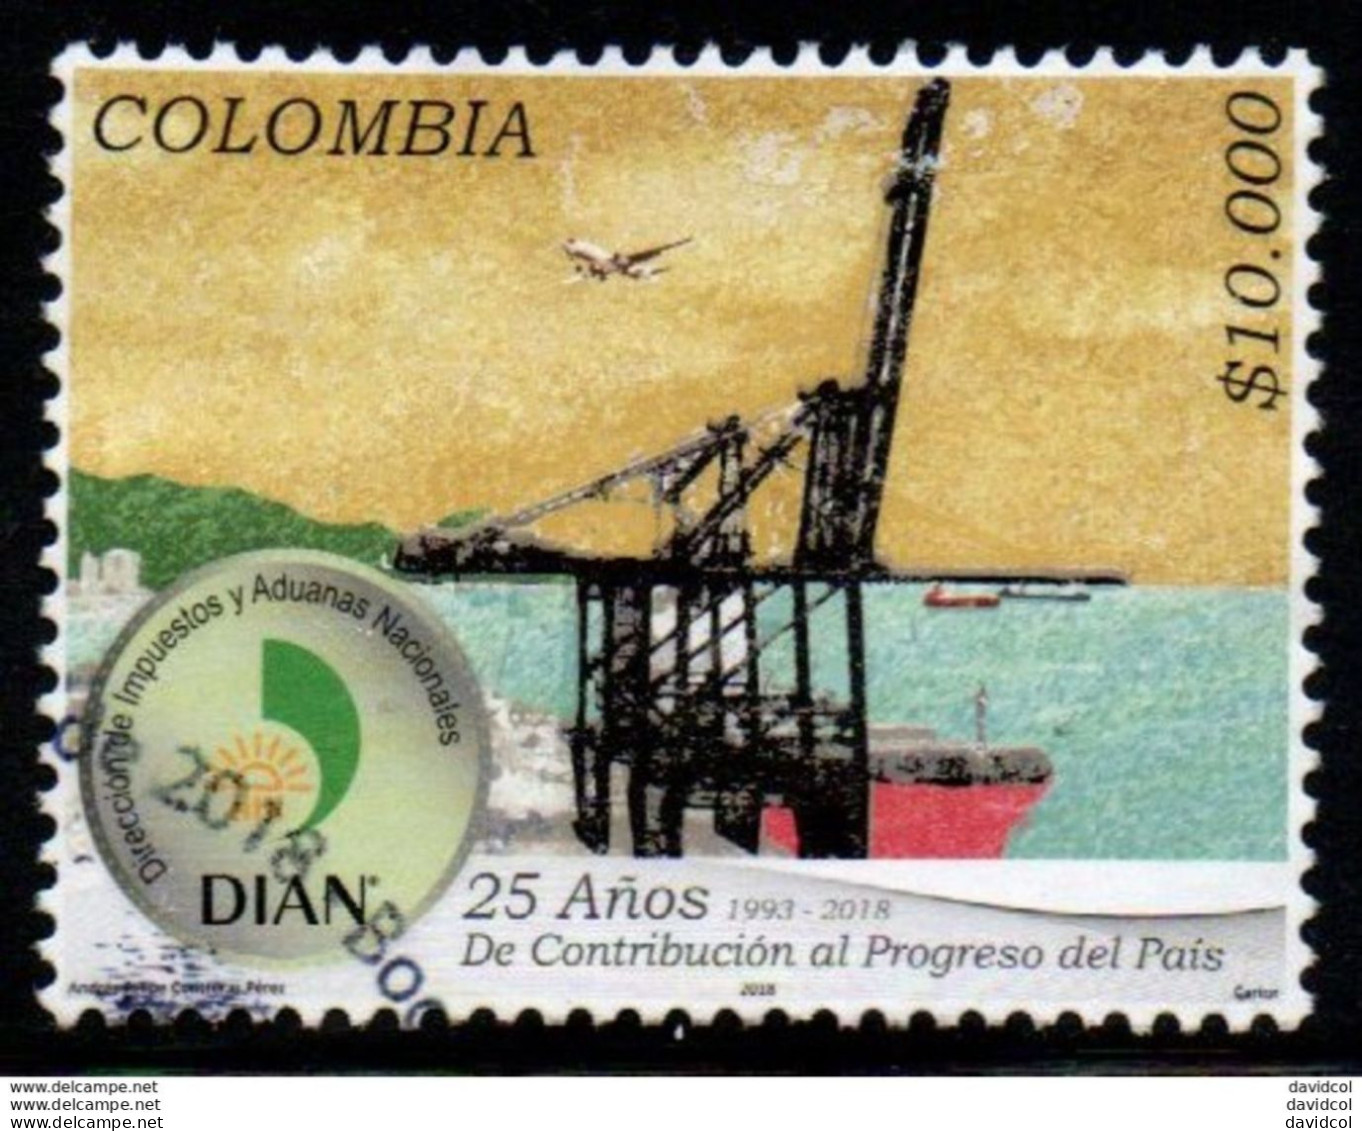 0066A- KOLUMBIEN- 2018 -USED- NATIONAL CUSTOMS AND TAXES 25 YEARS 1993-2018 - Colombia